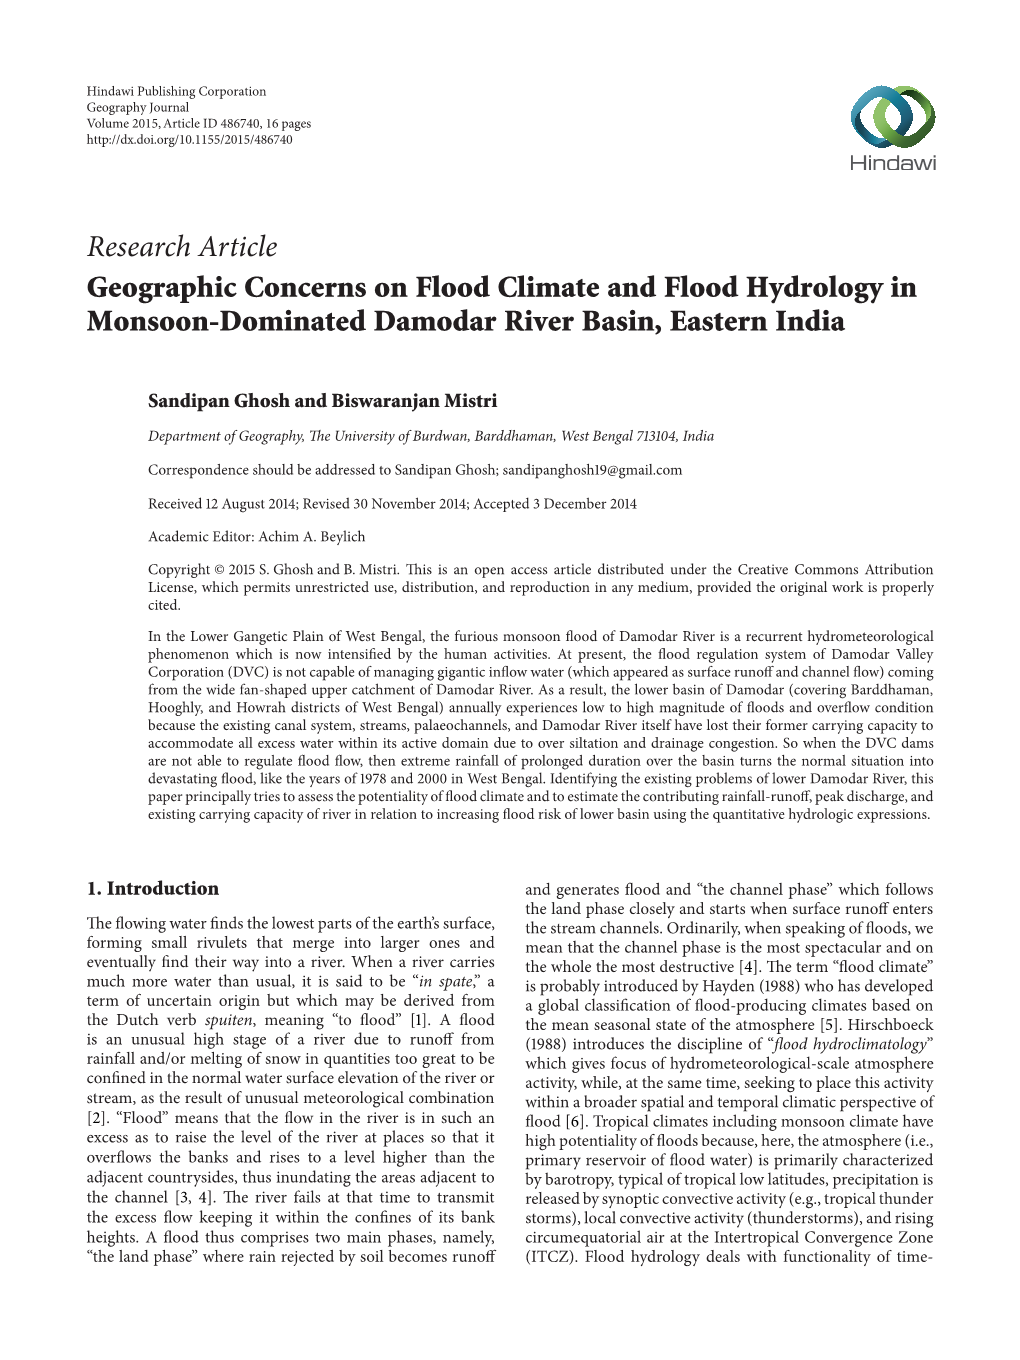 Geographic Concerns on Flood Climate and Flood Hydrology in Monsoon-Dominated Damodar River Basin, Eastern India